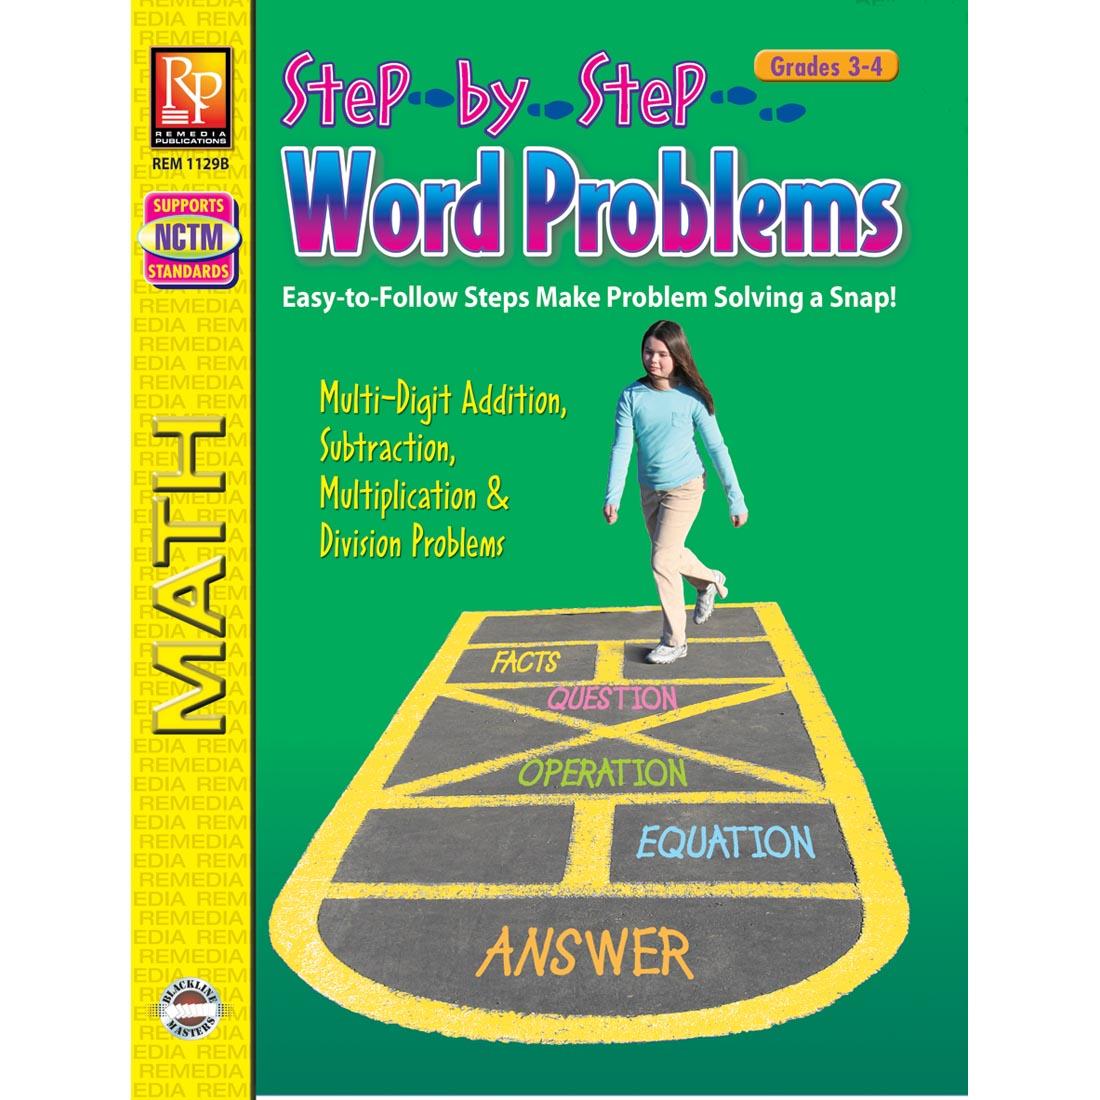 Step-By-Step Word Problems Grades 3-4